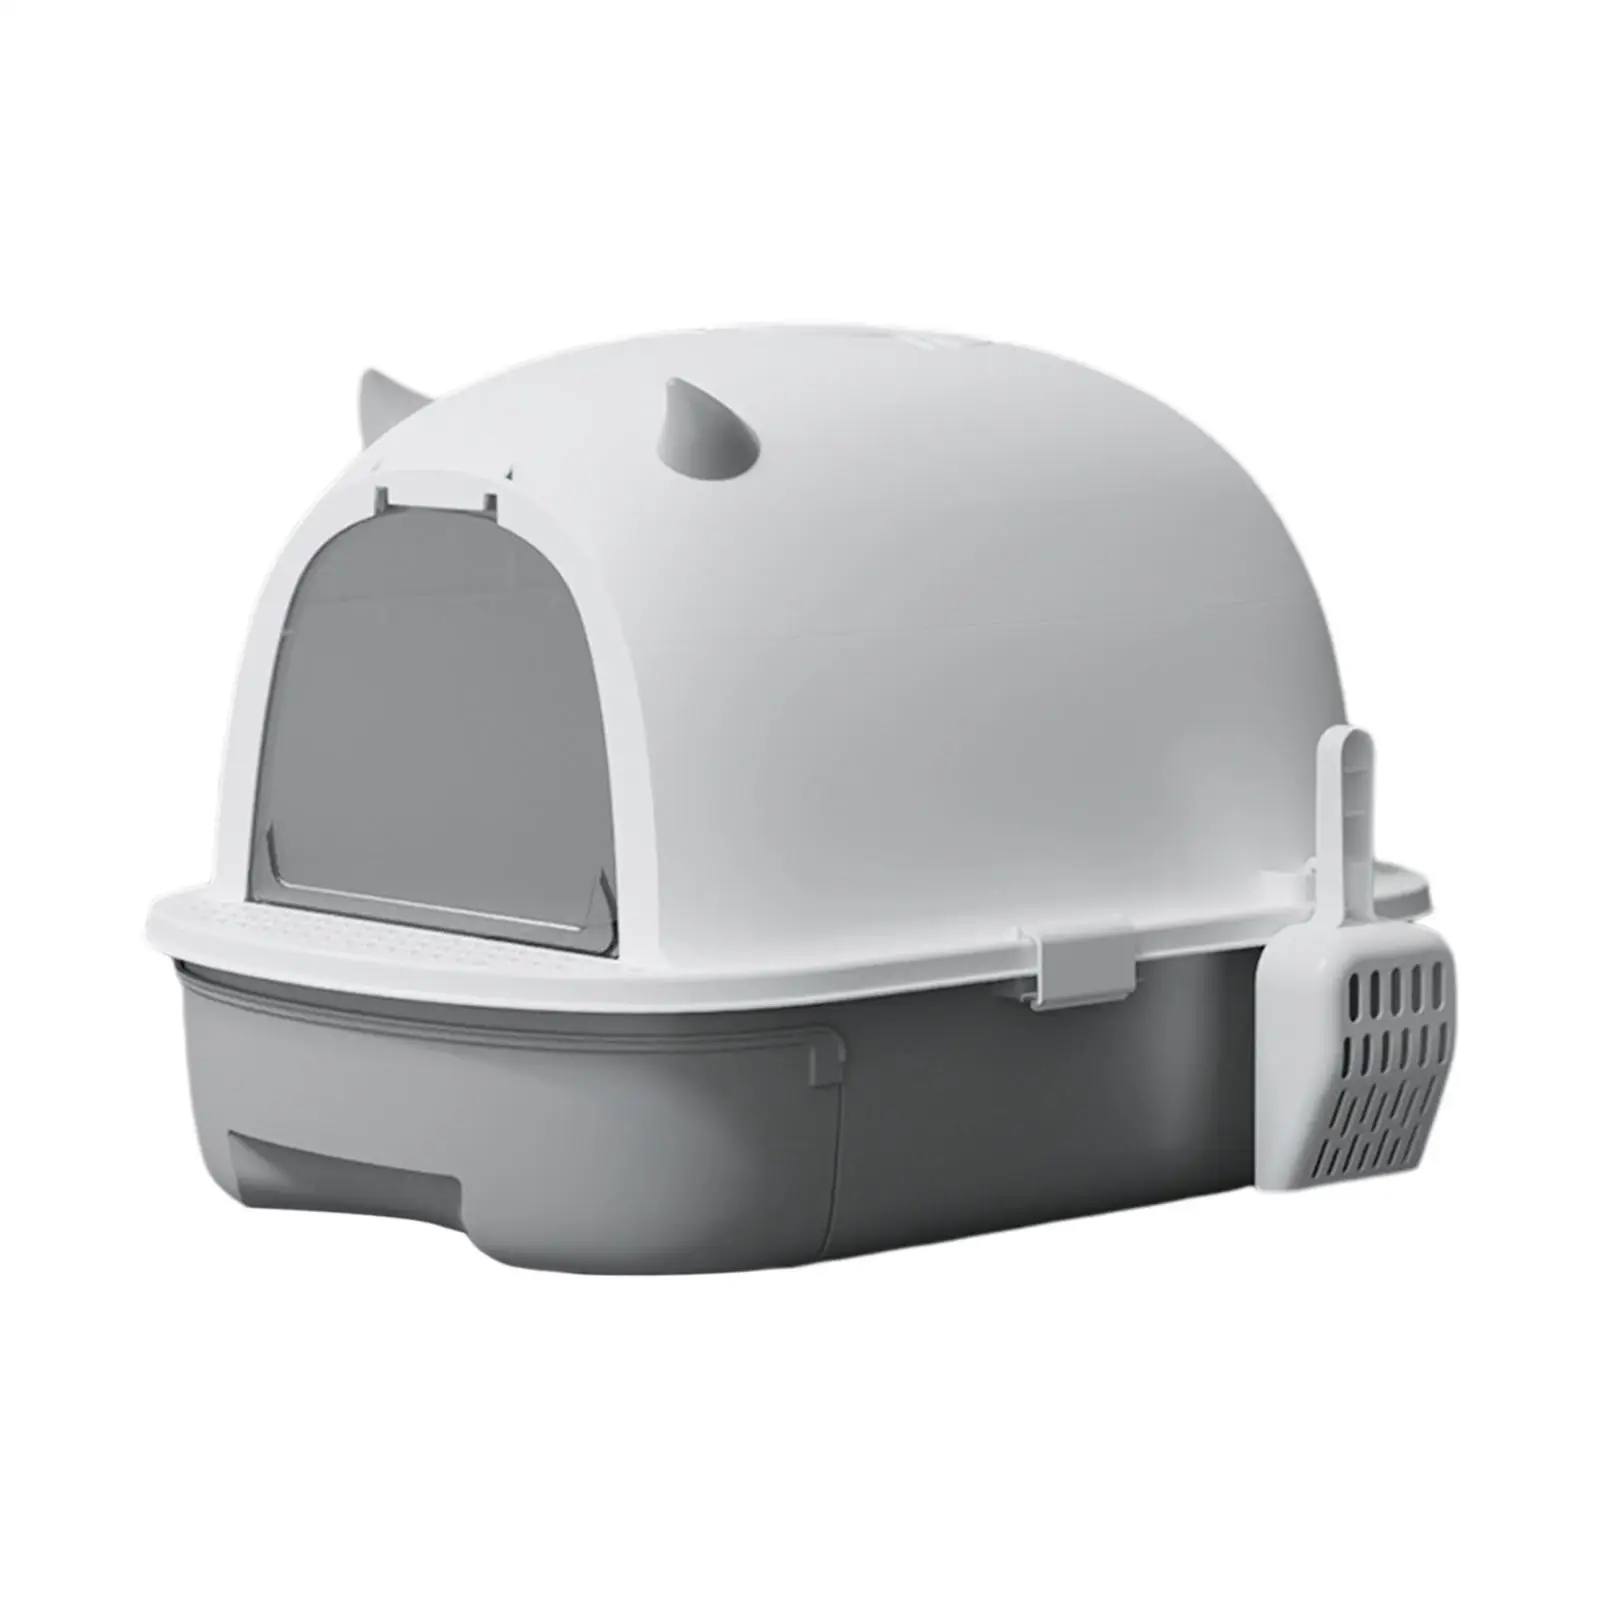 Hooded Cat Litter Box Removable Easy to Clean Accessories Portable Large with Door Cat Litter Tray with Shovel Kitten Potty